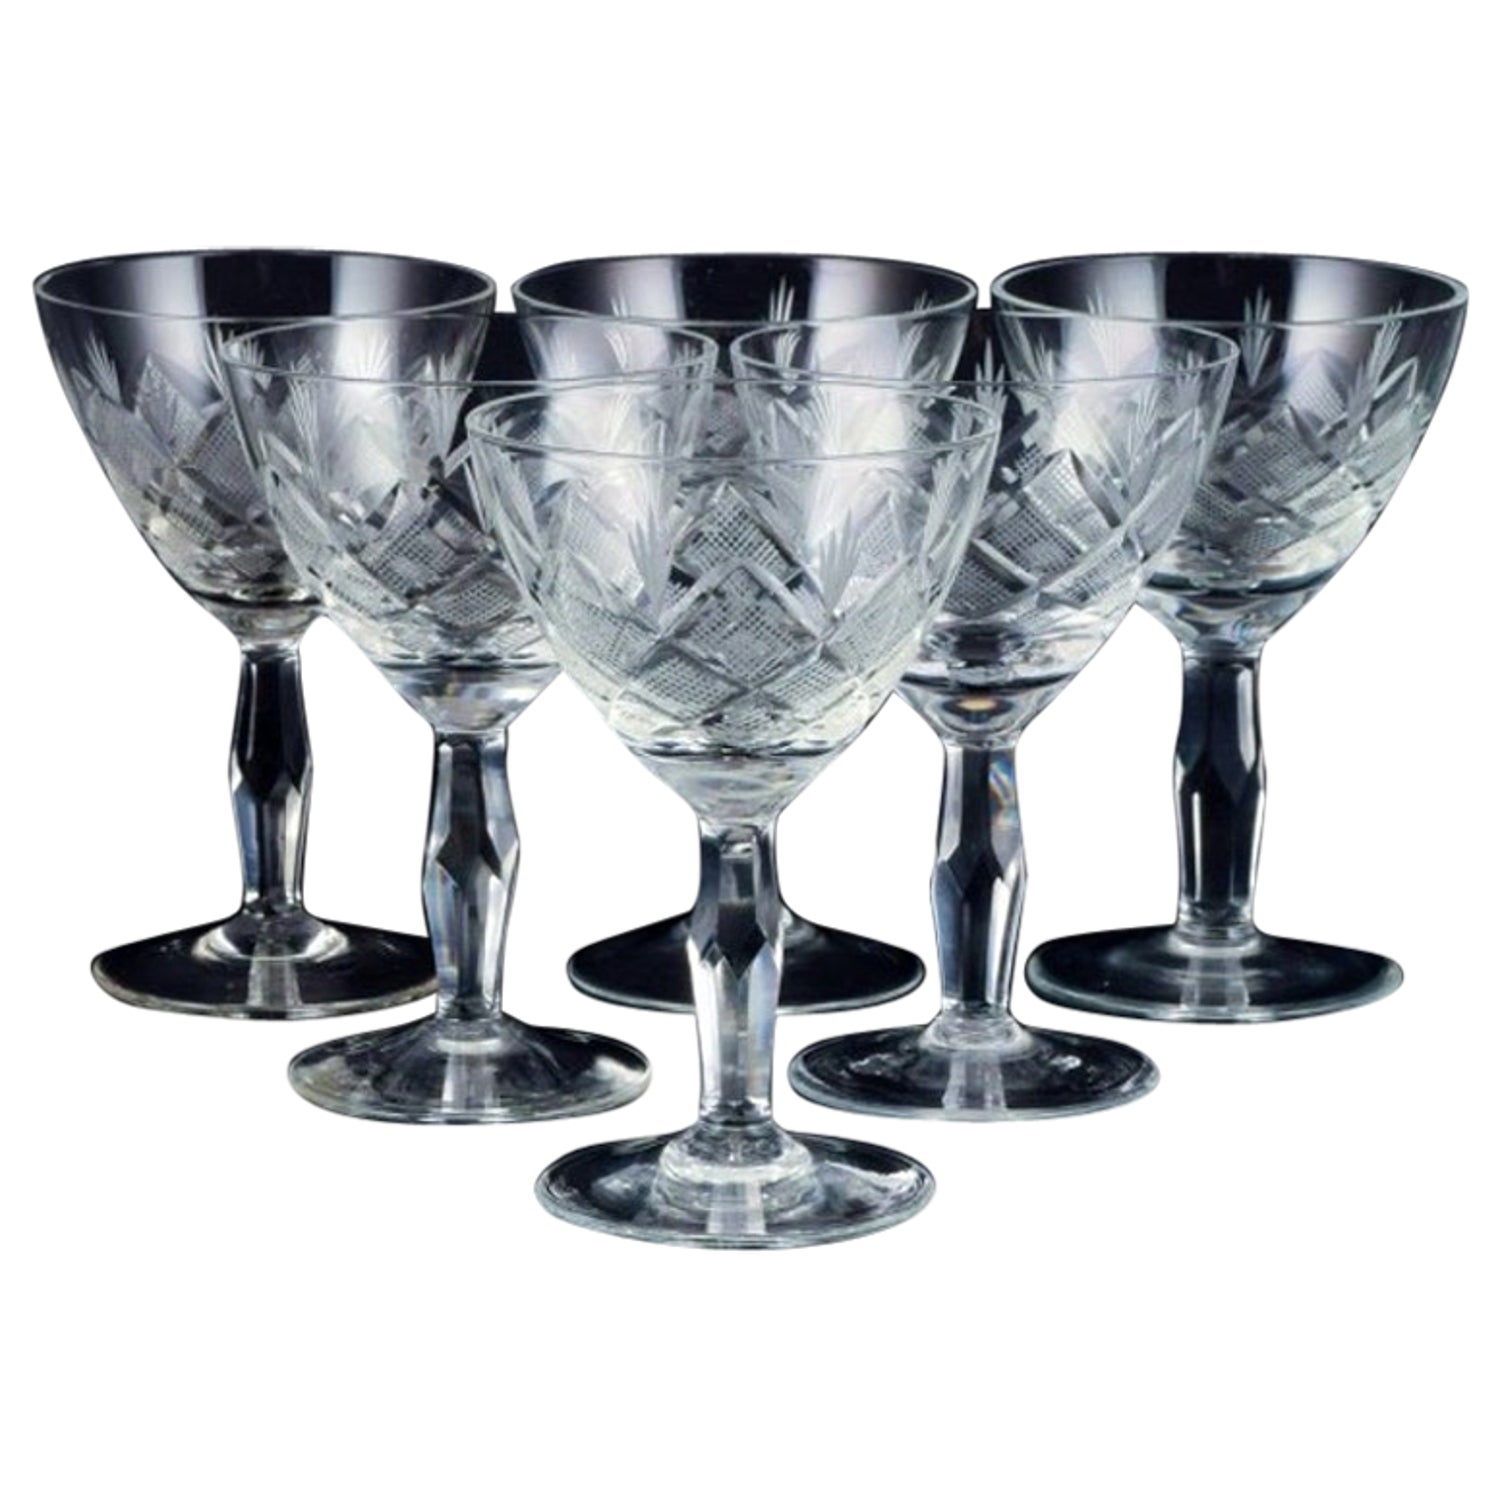 Wien Antik, Lyngby Glas, Denmark, Vintage Set of Six Clear Sherry Glasses  For Sale at 1stDibs | lyngby glass denmark, antik glas